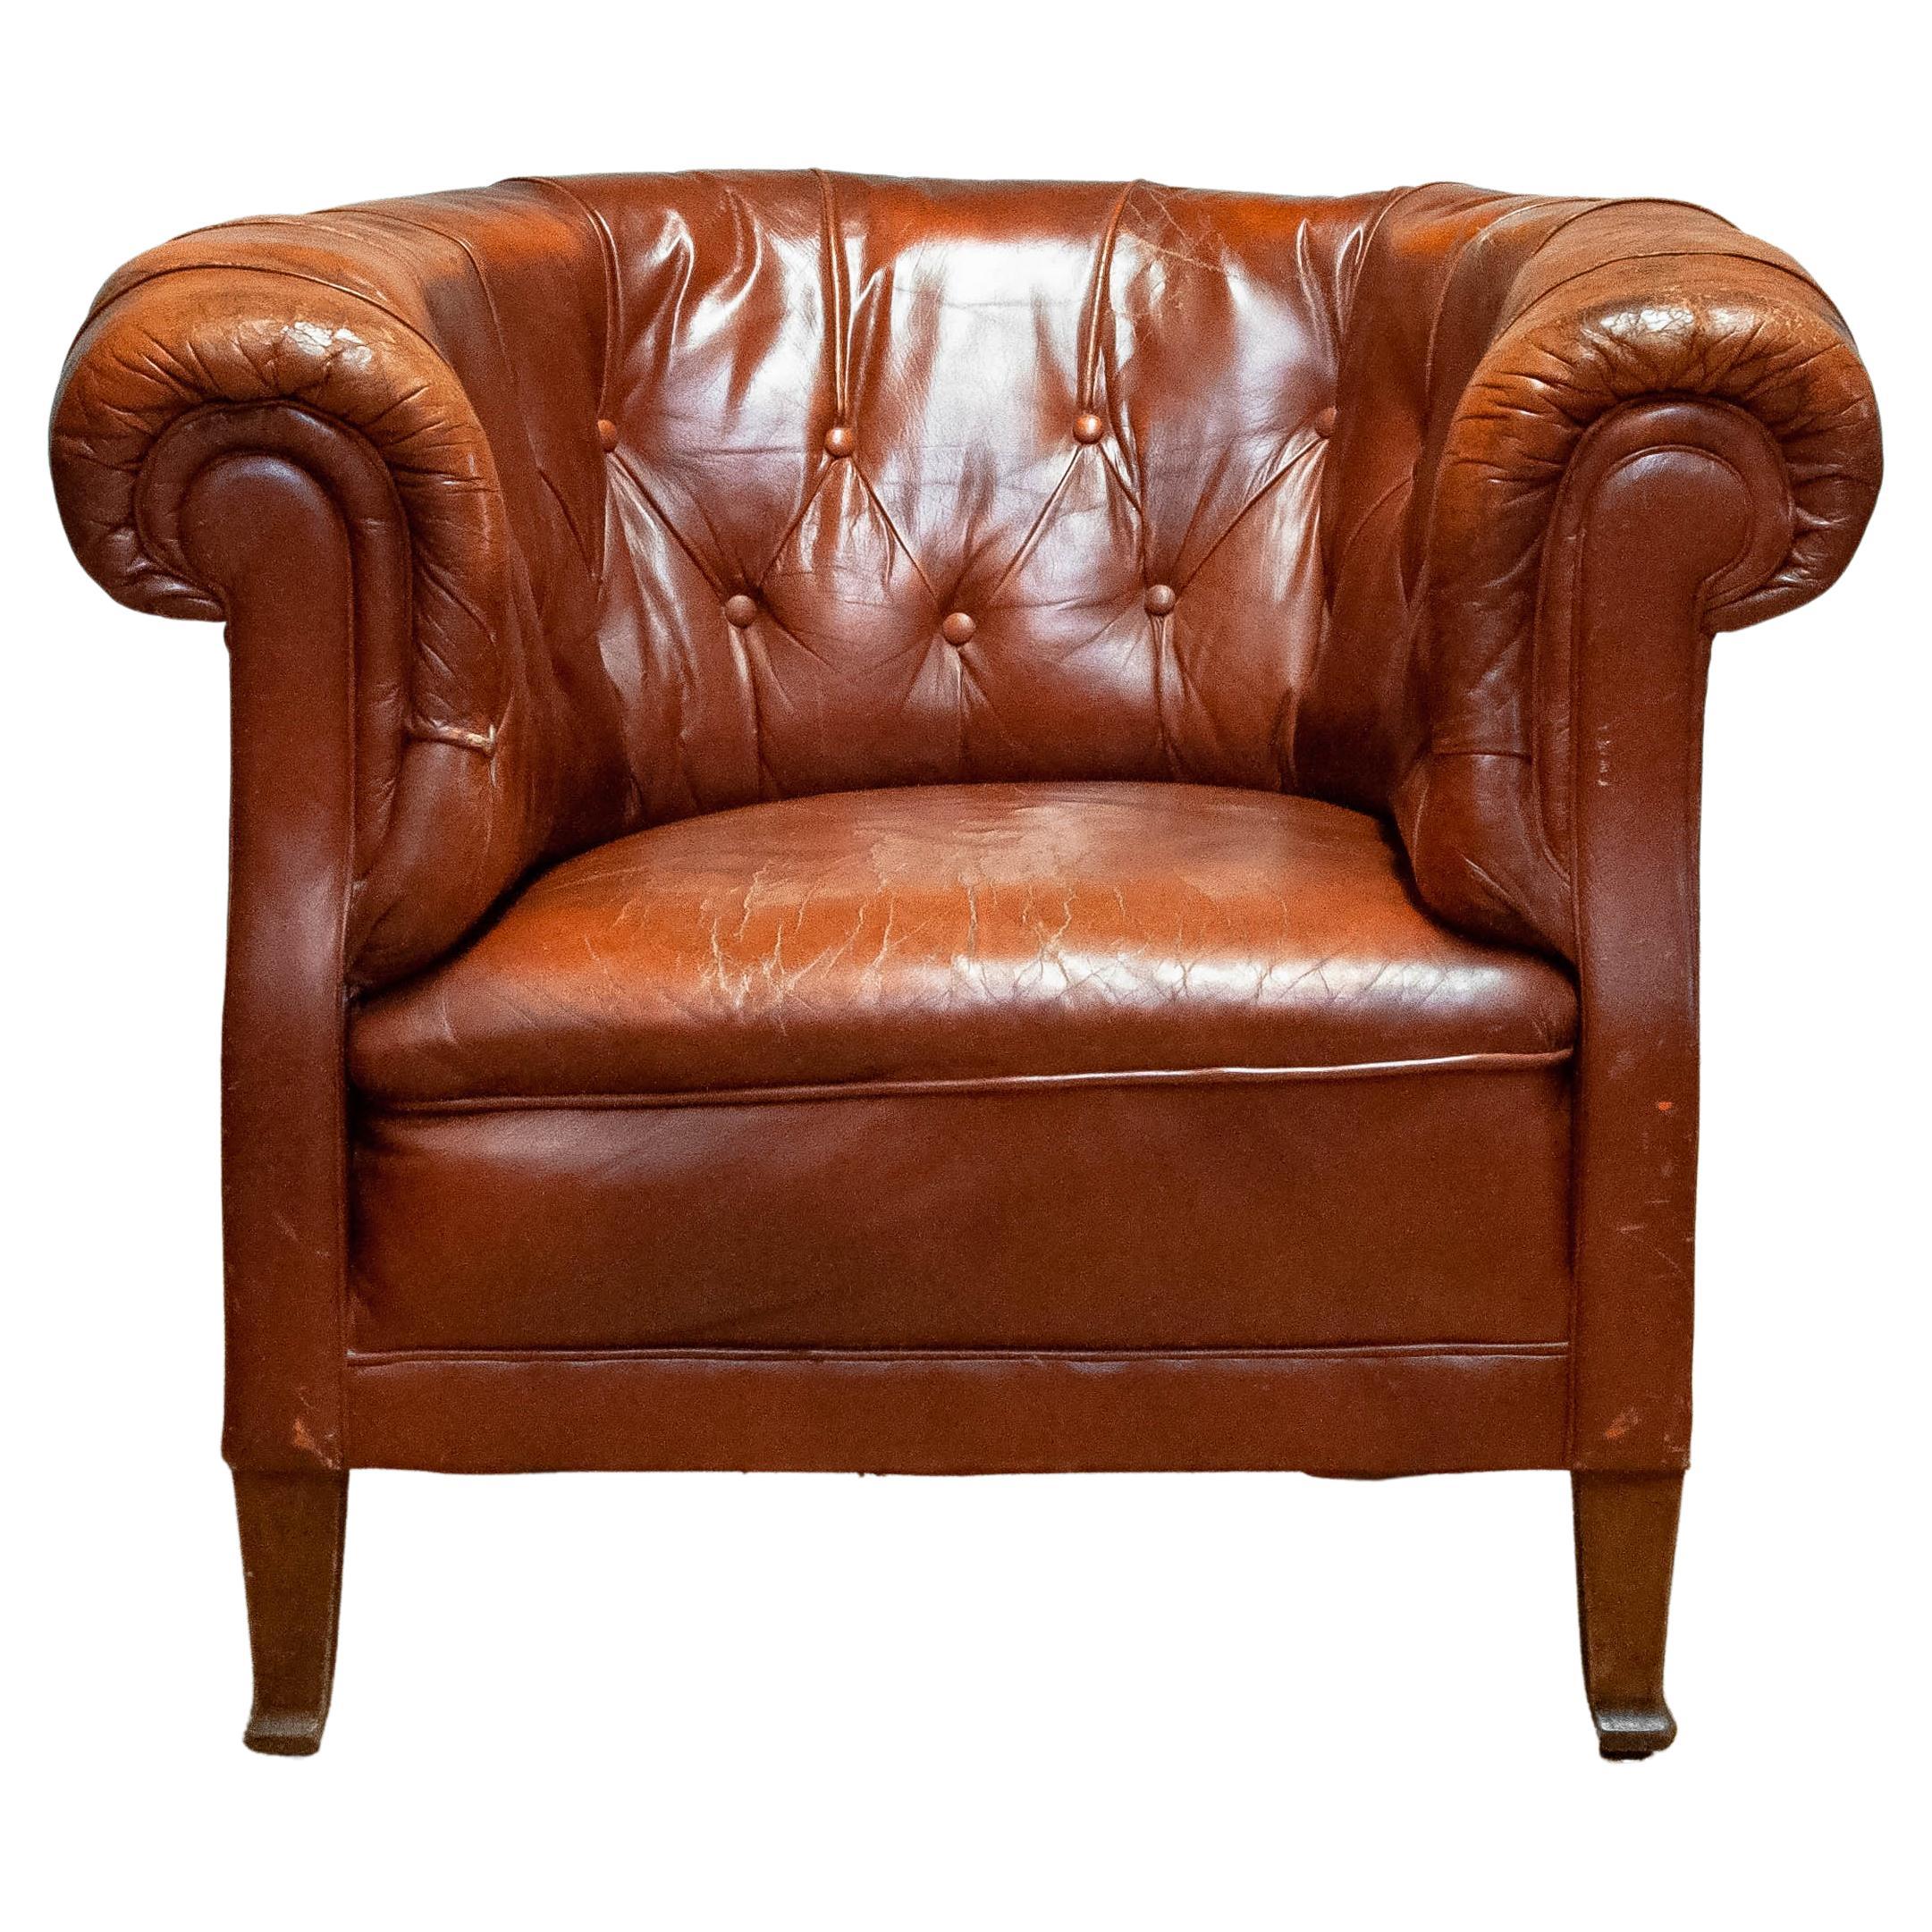 1940s Swedish Tufted Club Chair 'Chesterfield Model' In Tan Brown Worn Leather